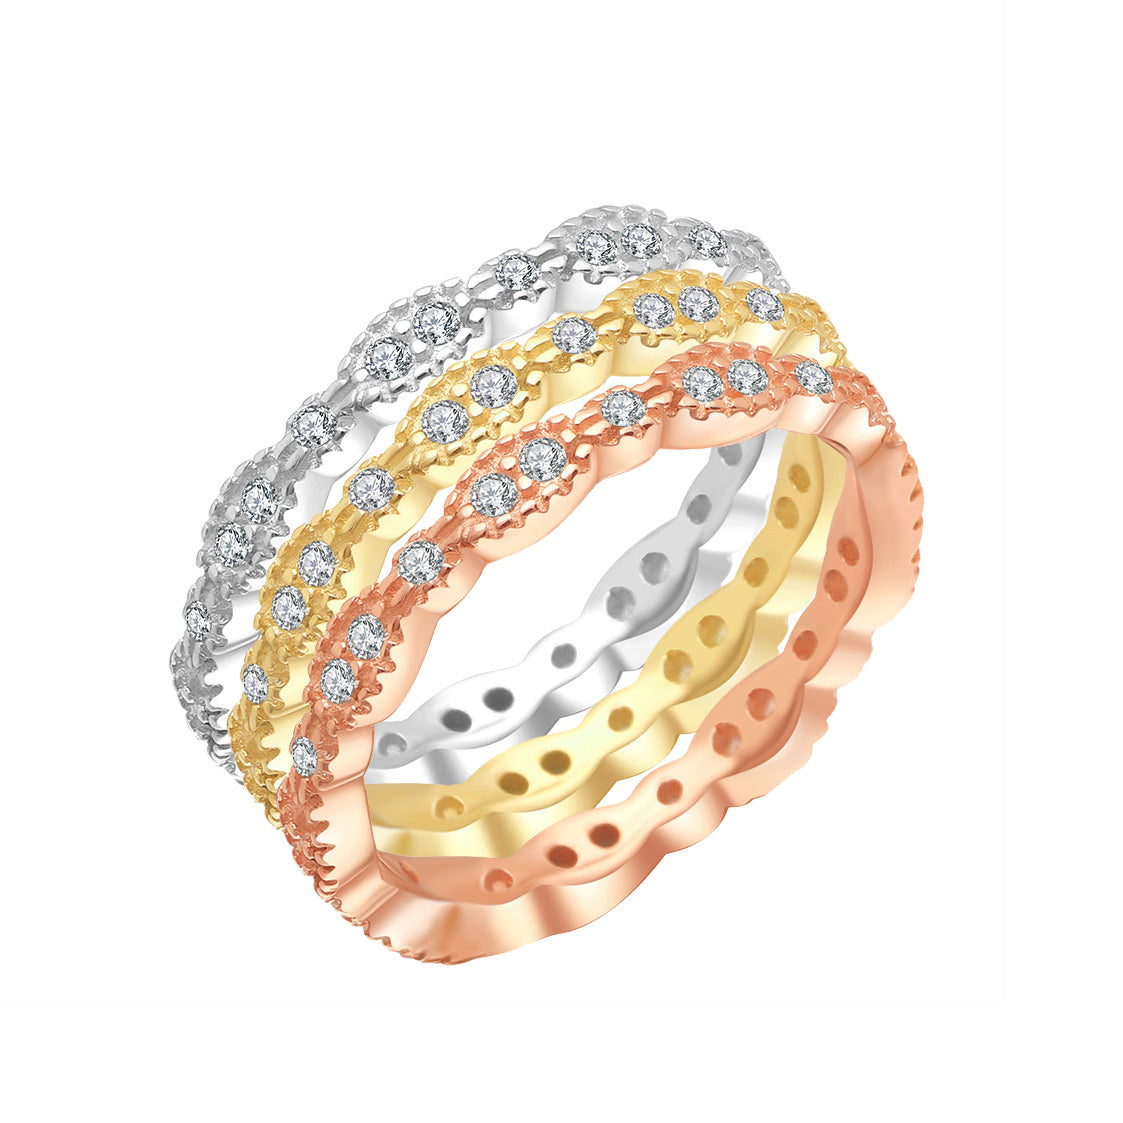 Eternity Wedding Band Ring Set Sterling Silver Cz Womens Ginger Lyne - Scallop-3 Color Set,9